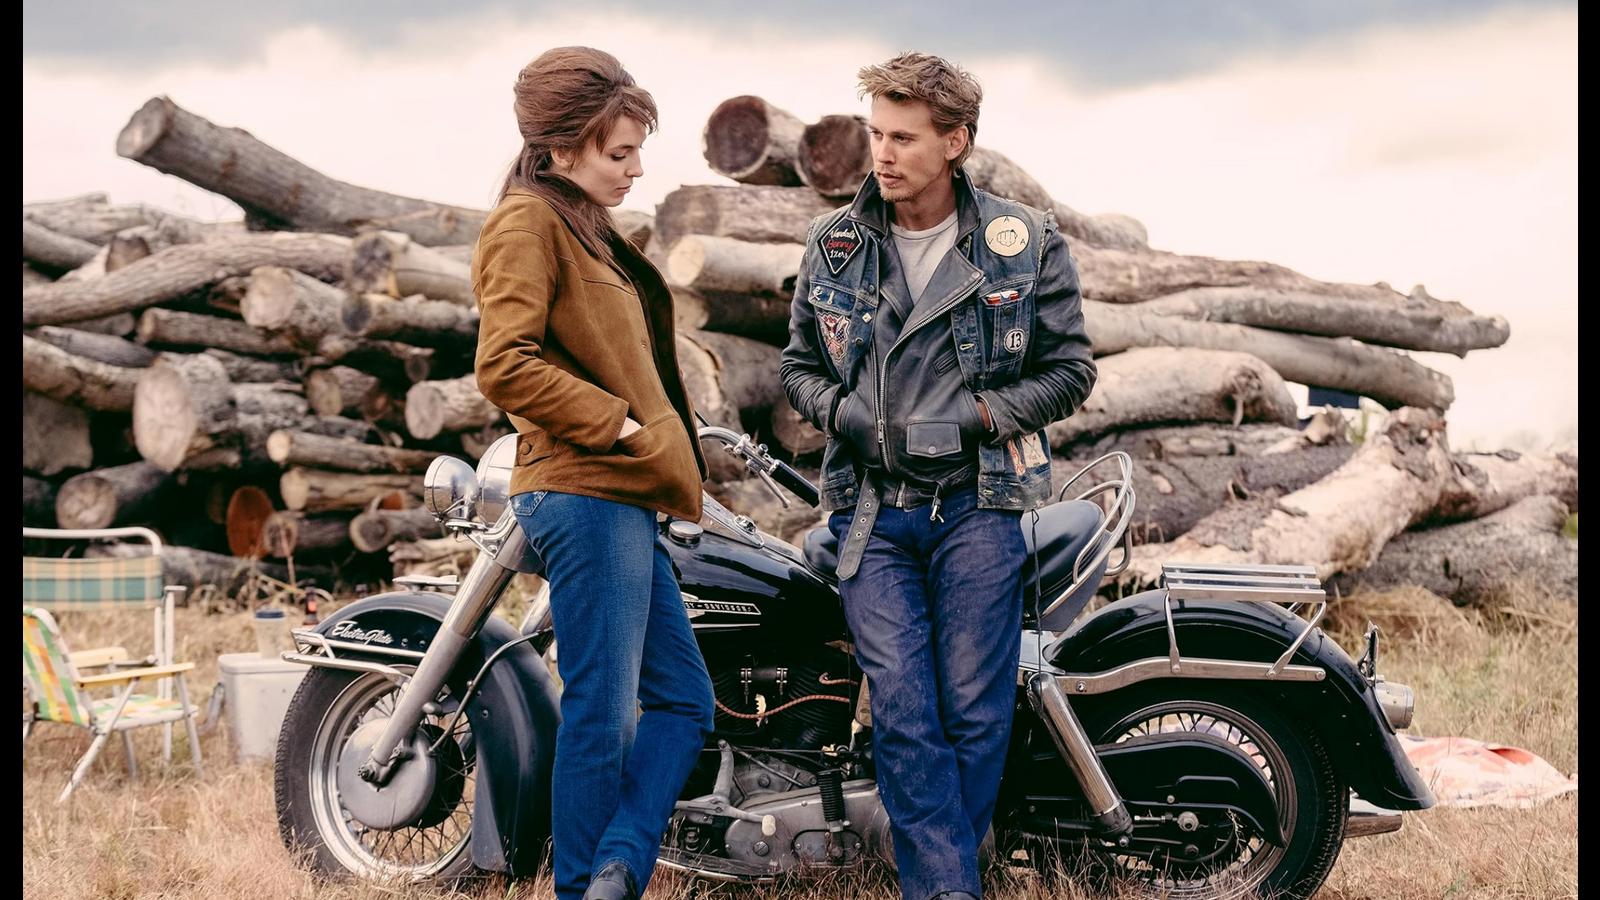 Jeff Nichols’ The Bikeriders: A road out of history